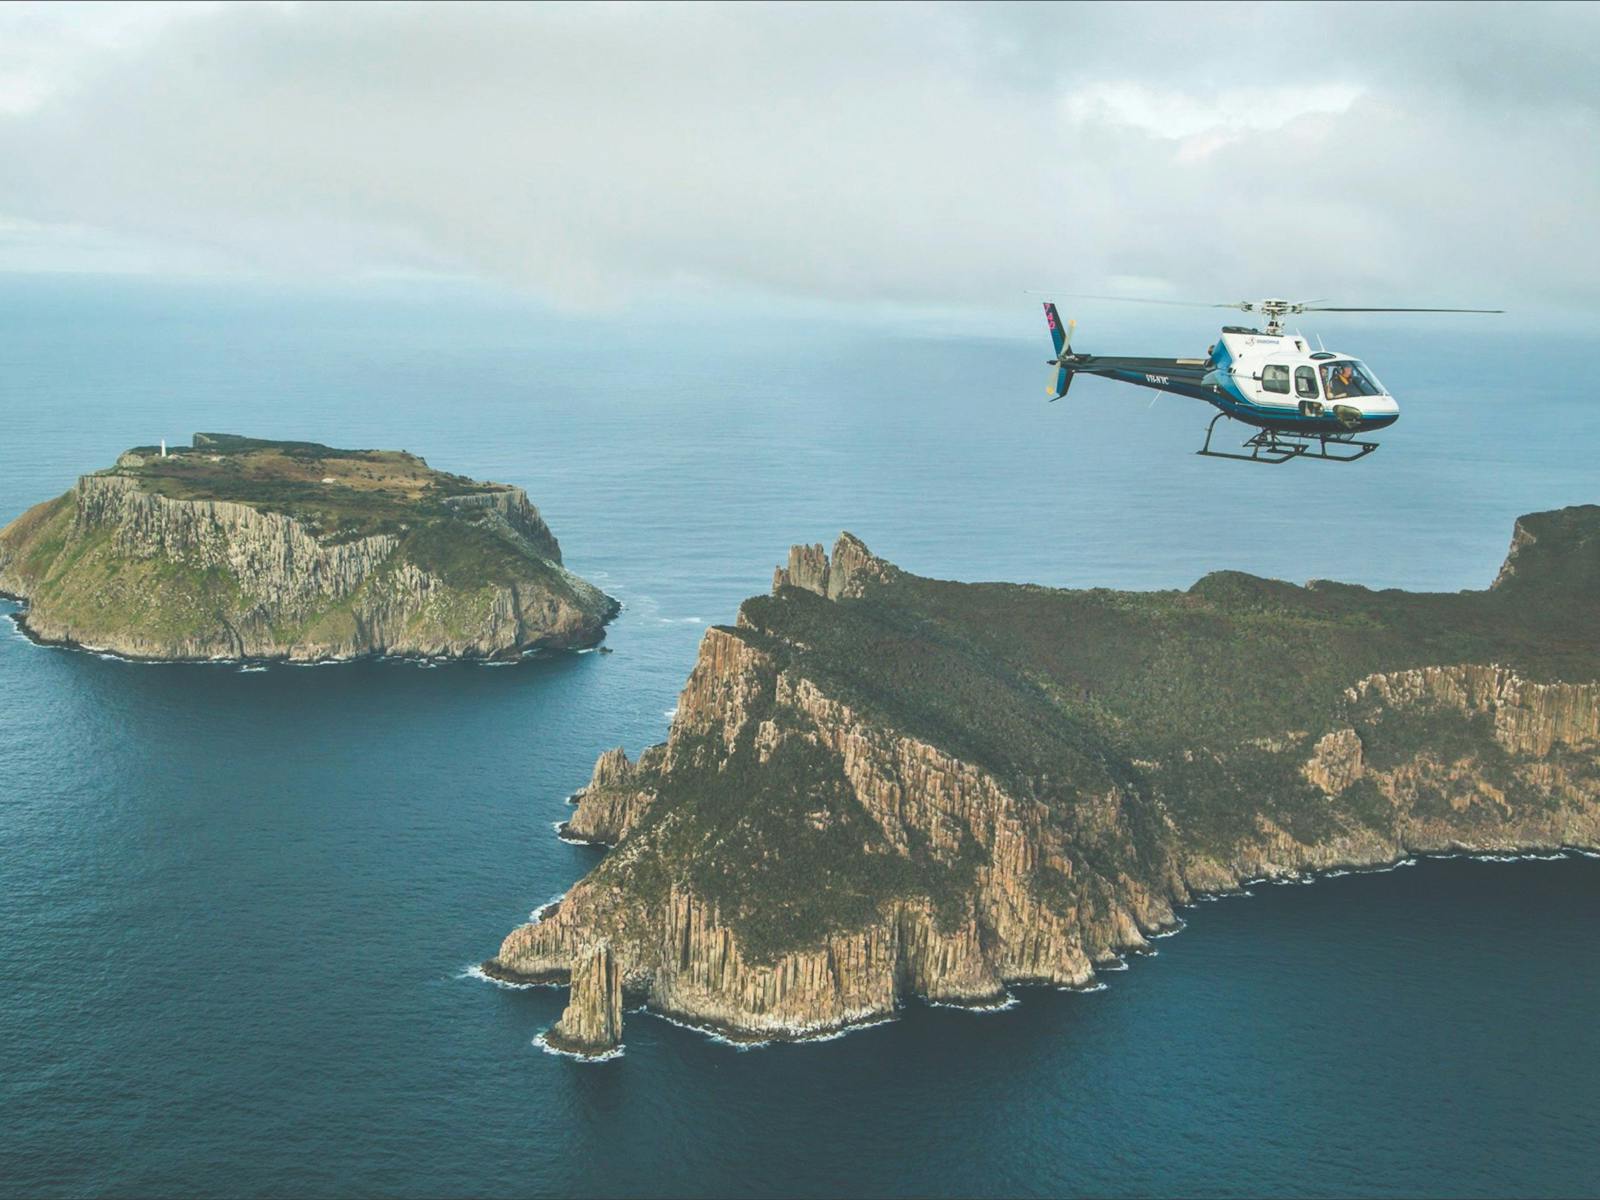 Cape Pillar is one of Australia's must do helicopter flight